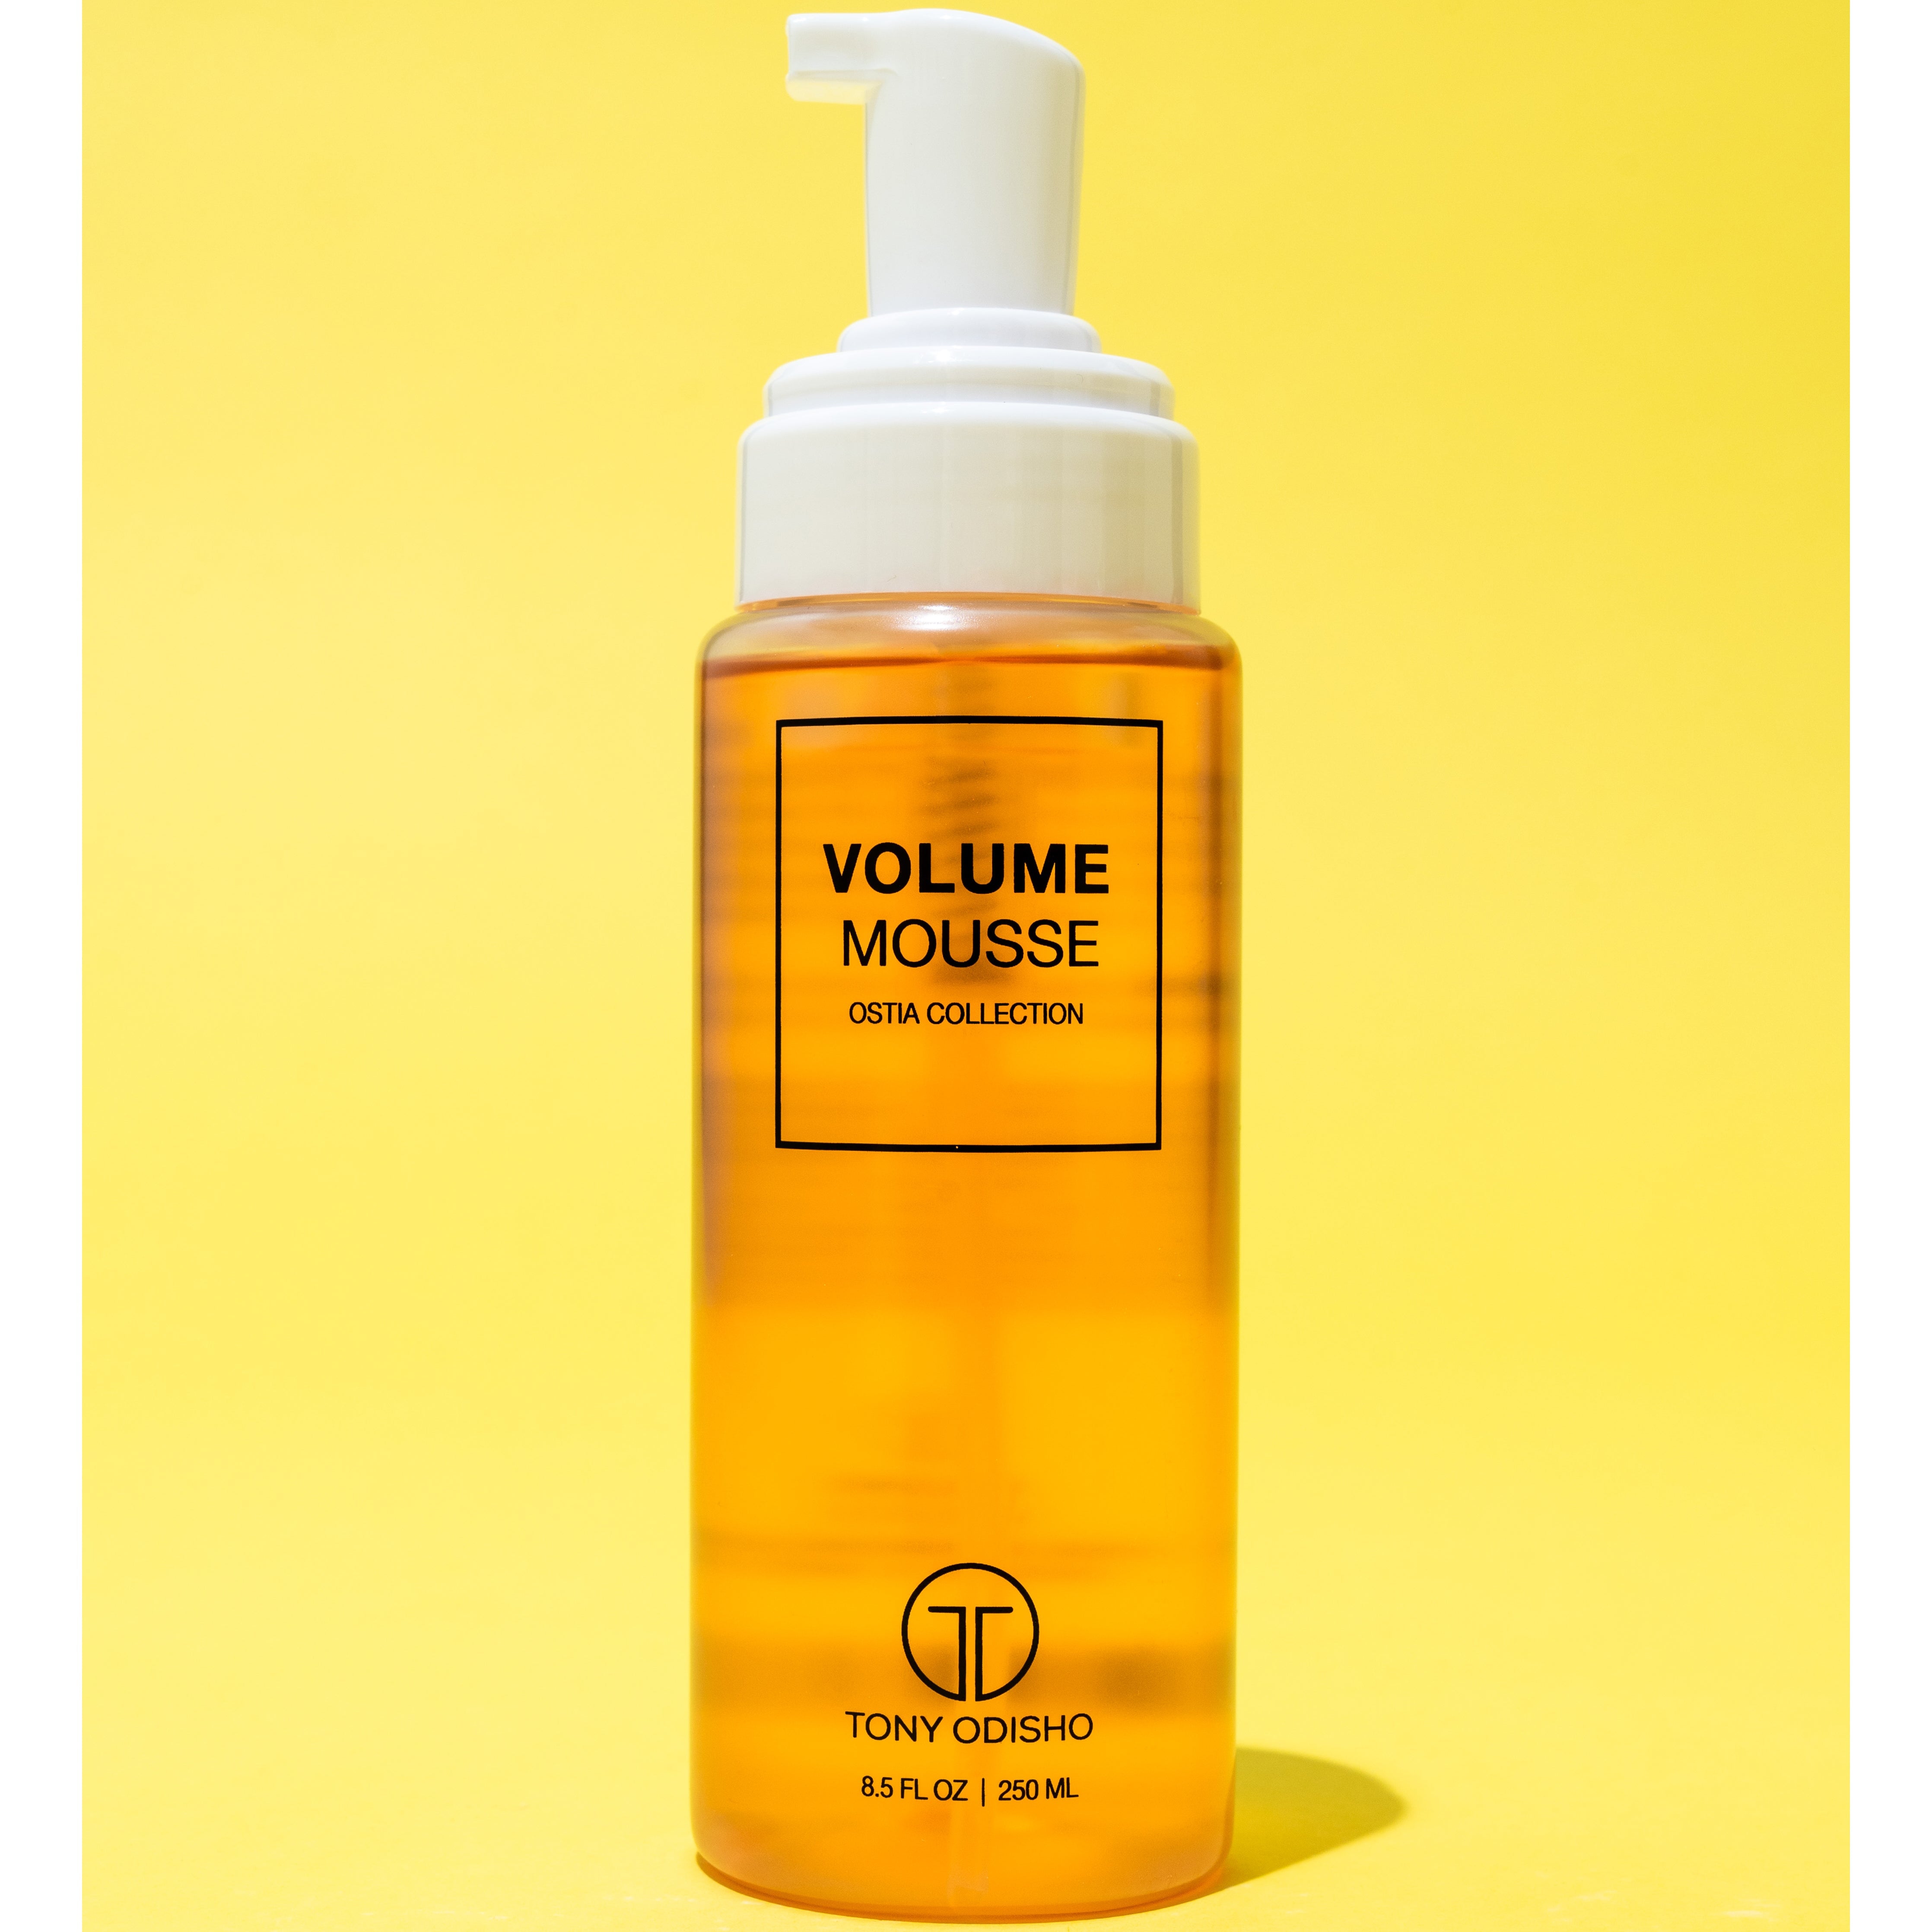 Ostia Collection Volume Mousse | Lightweight Foam | Adds volume and shine | Provides hairstyling versatility - Image 1